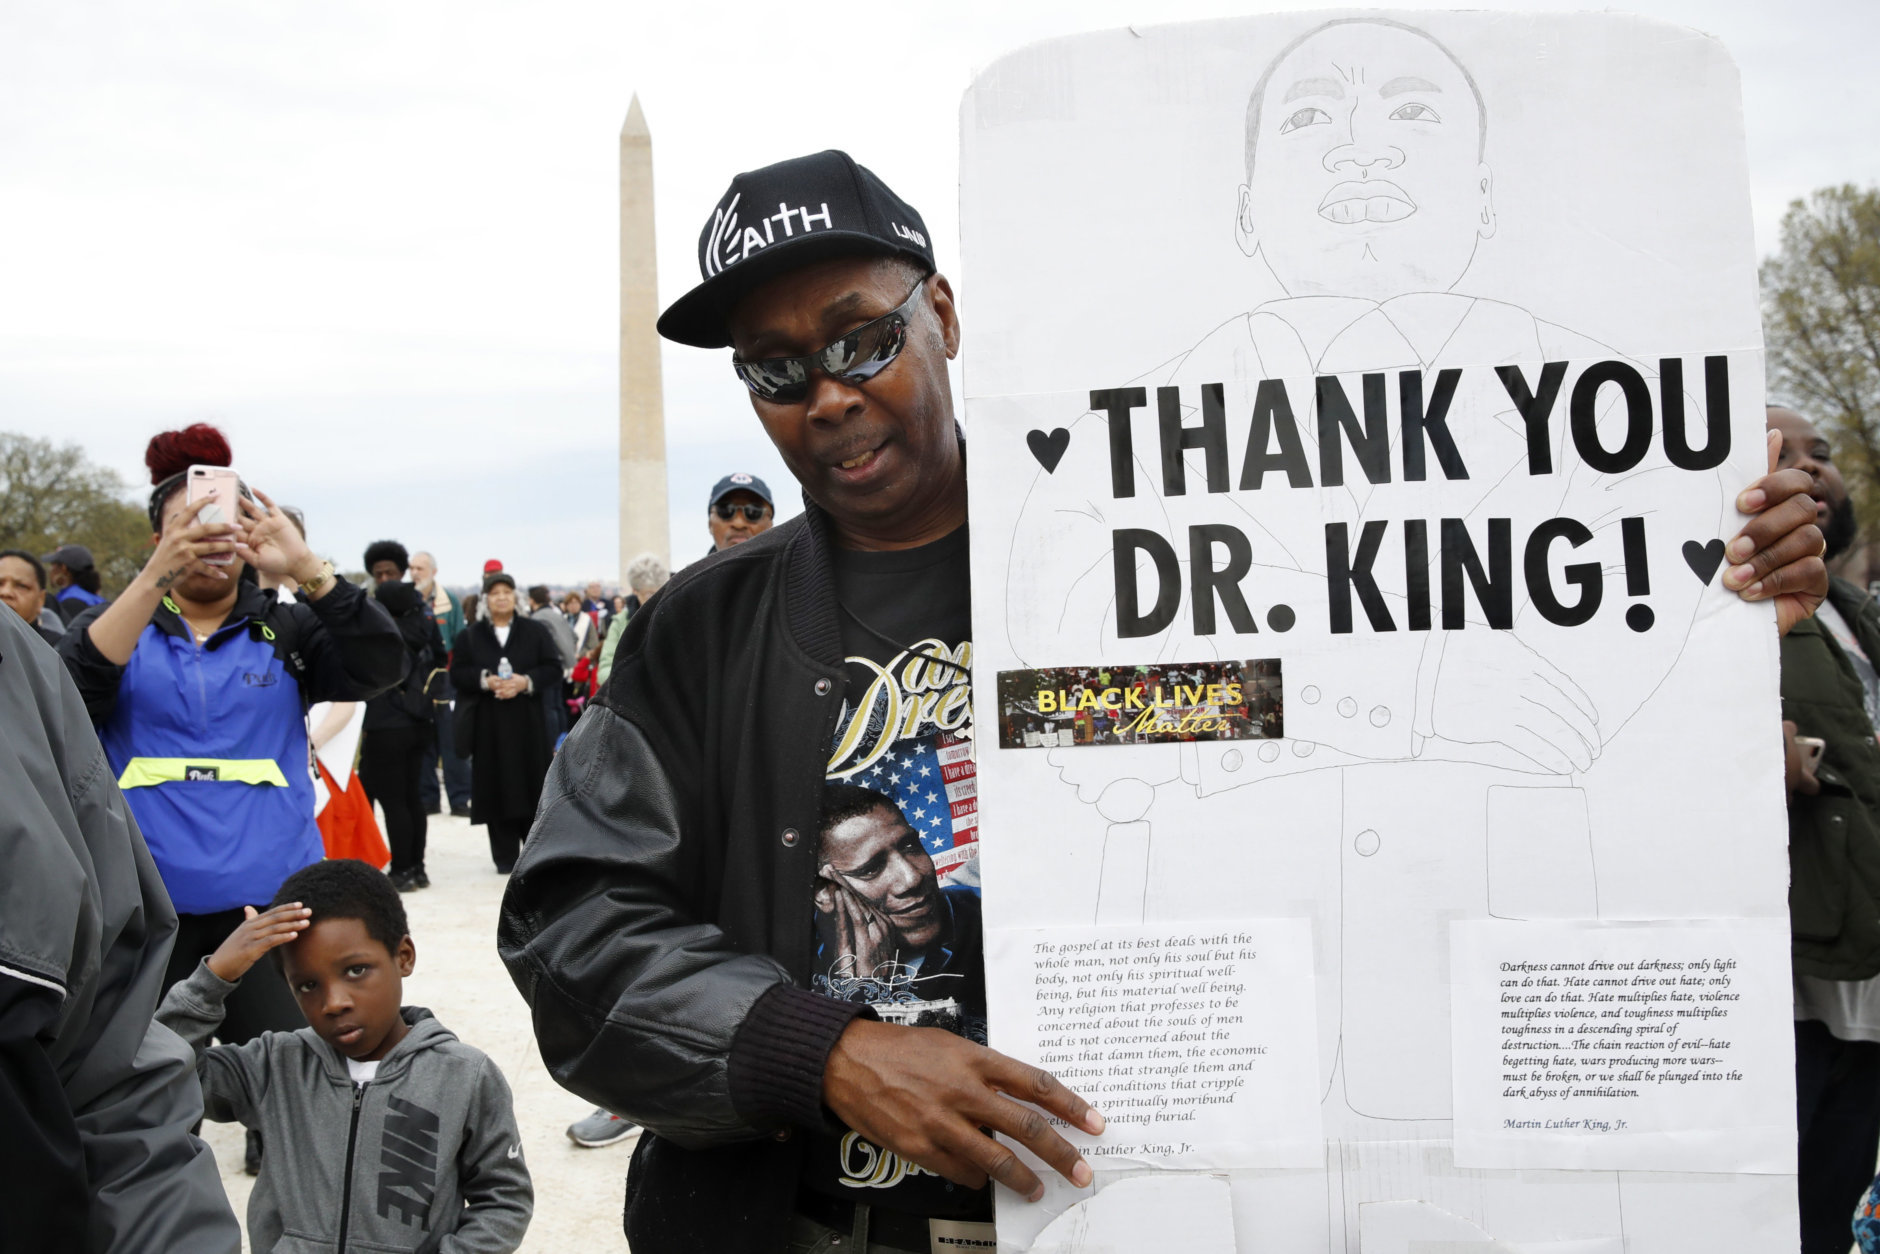 Leonard Patterson, of Manassas, Va., holds a hand made sign thanking Martin Luther King Jr., while attending the A.C.T. To End Racism rally, Wednesday, April 4, 2018, on the National Mall in Washington, on the 50th anniversary of King's assassination. (AP Photo/Jacquelyn Martin)